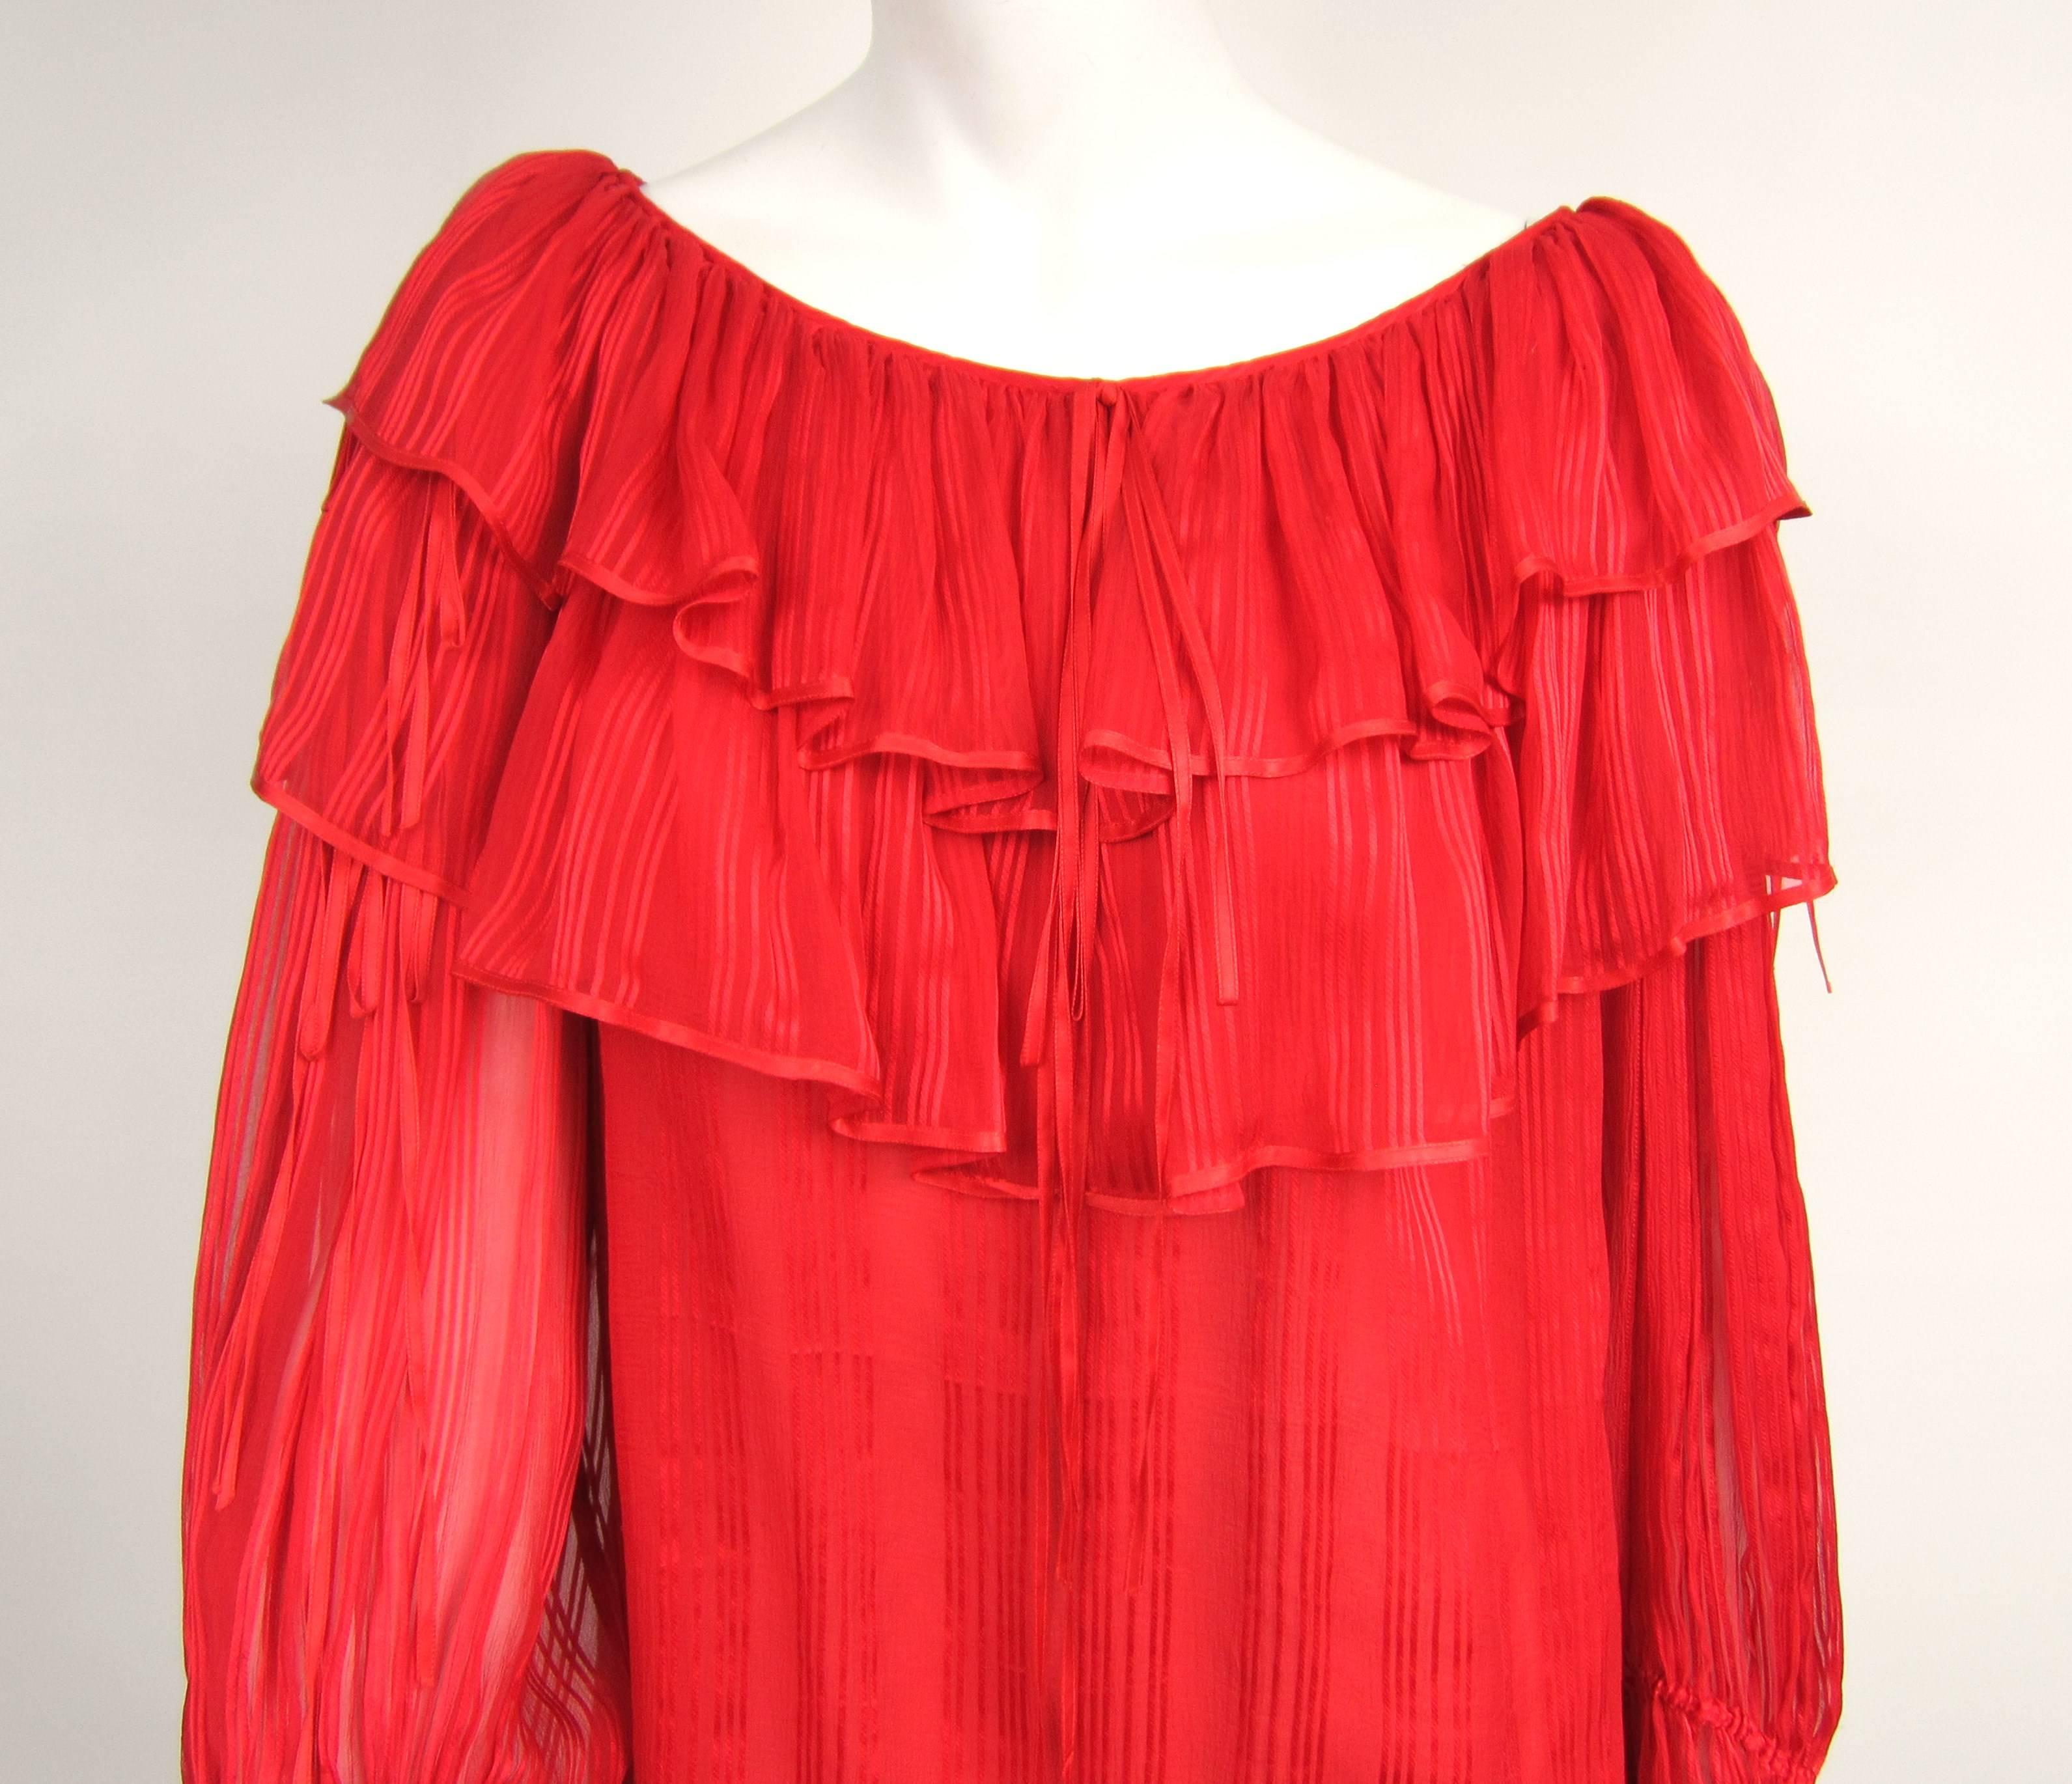 Stunning Red Ruffled YSL Silk Top Russian Collection 1976. Numbered 41163 Yves Saint Laurent Paris Double Ruffles on this amazing piece of YSL history! Large oversized bell cuff sleeves. Ribbons accent the shirt Measuring - Up to 38 bust -Waist open